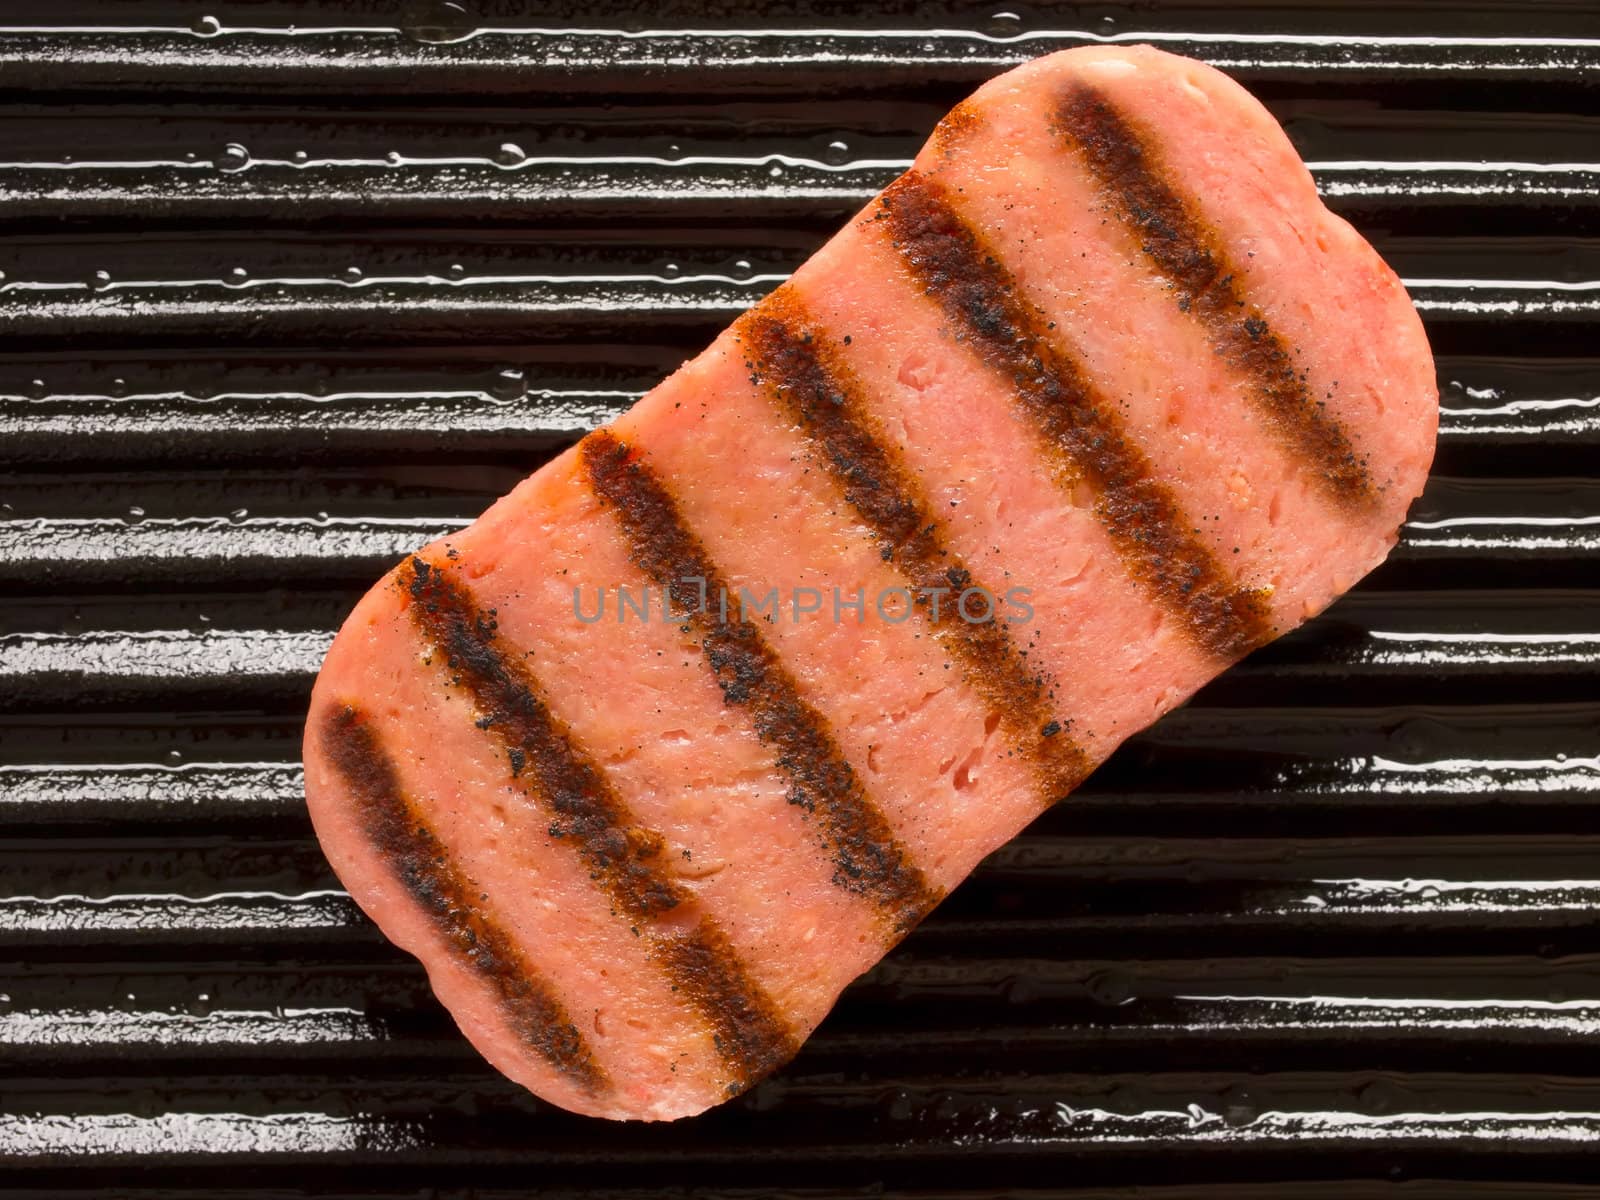 spam on a grill by zkruger